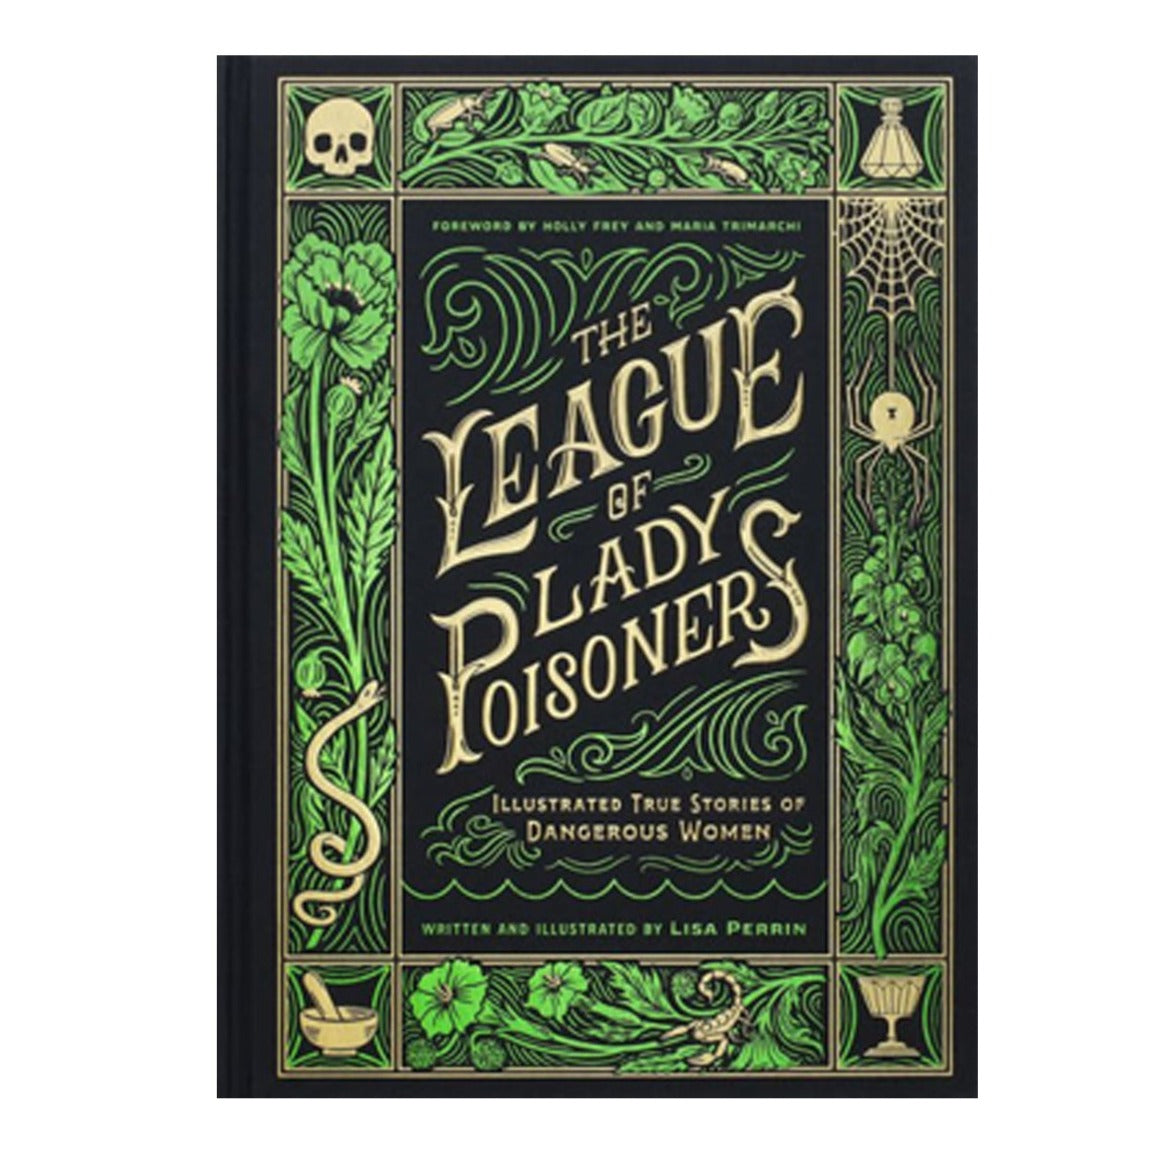 The League Of Lady Poisoners